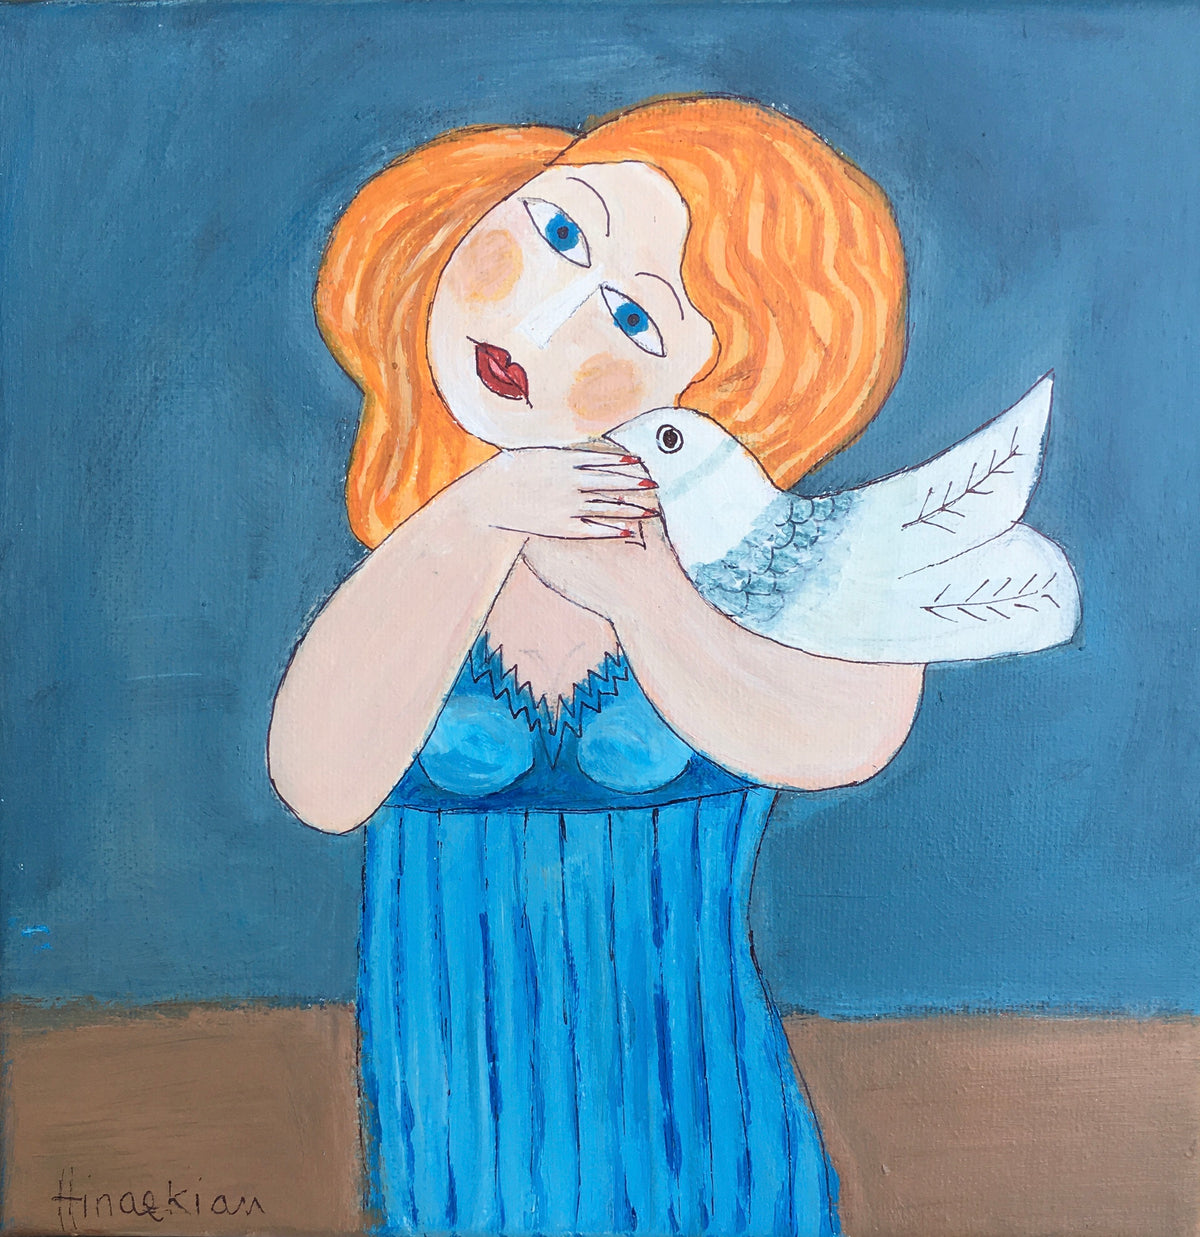 Small Female Figurative Artwork with hues of blue & orange hair colors 